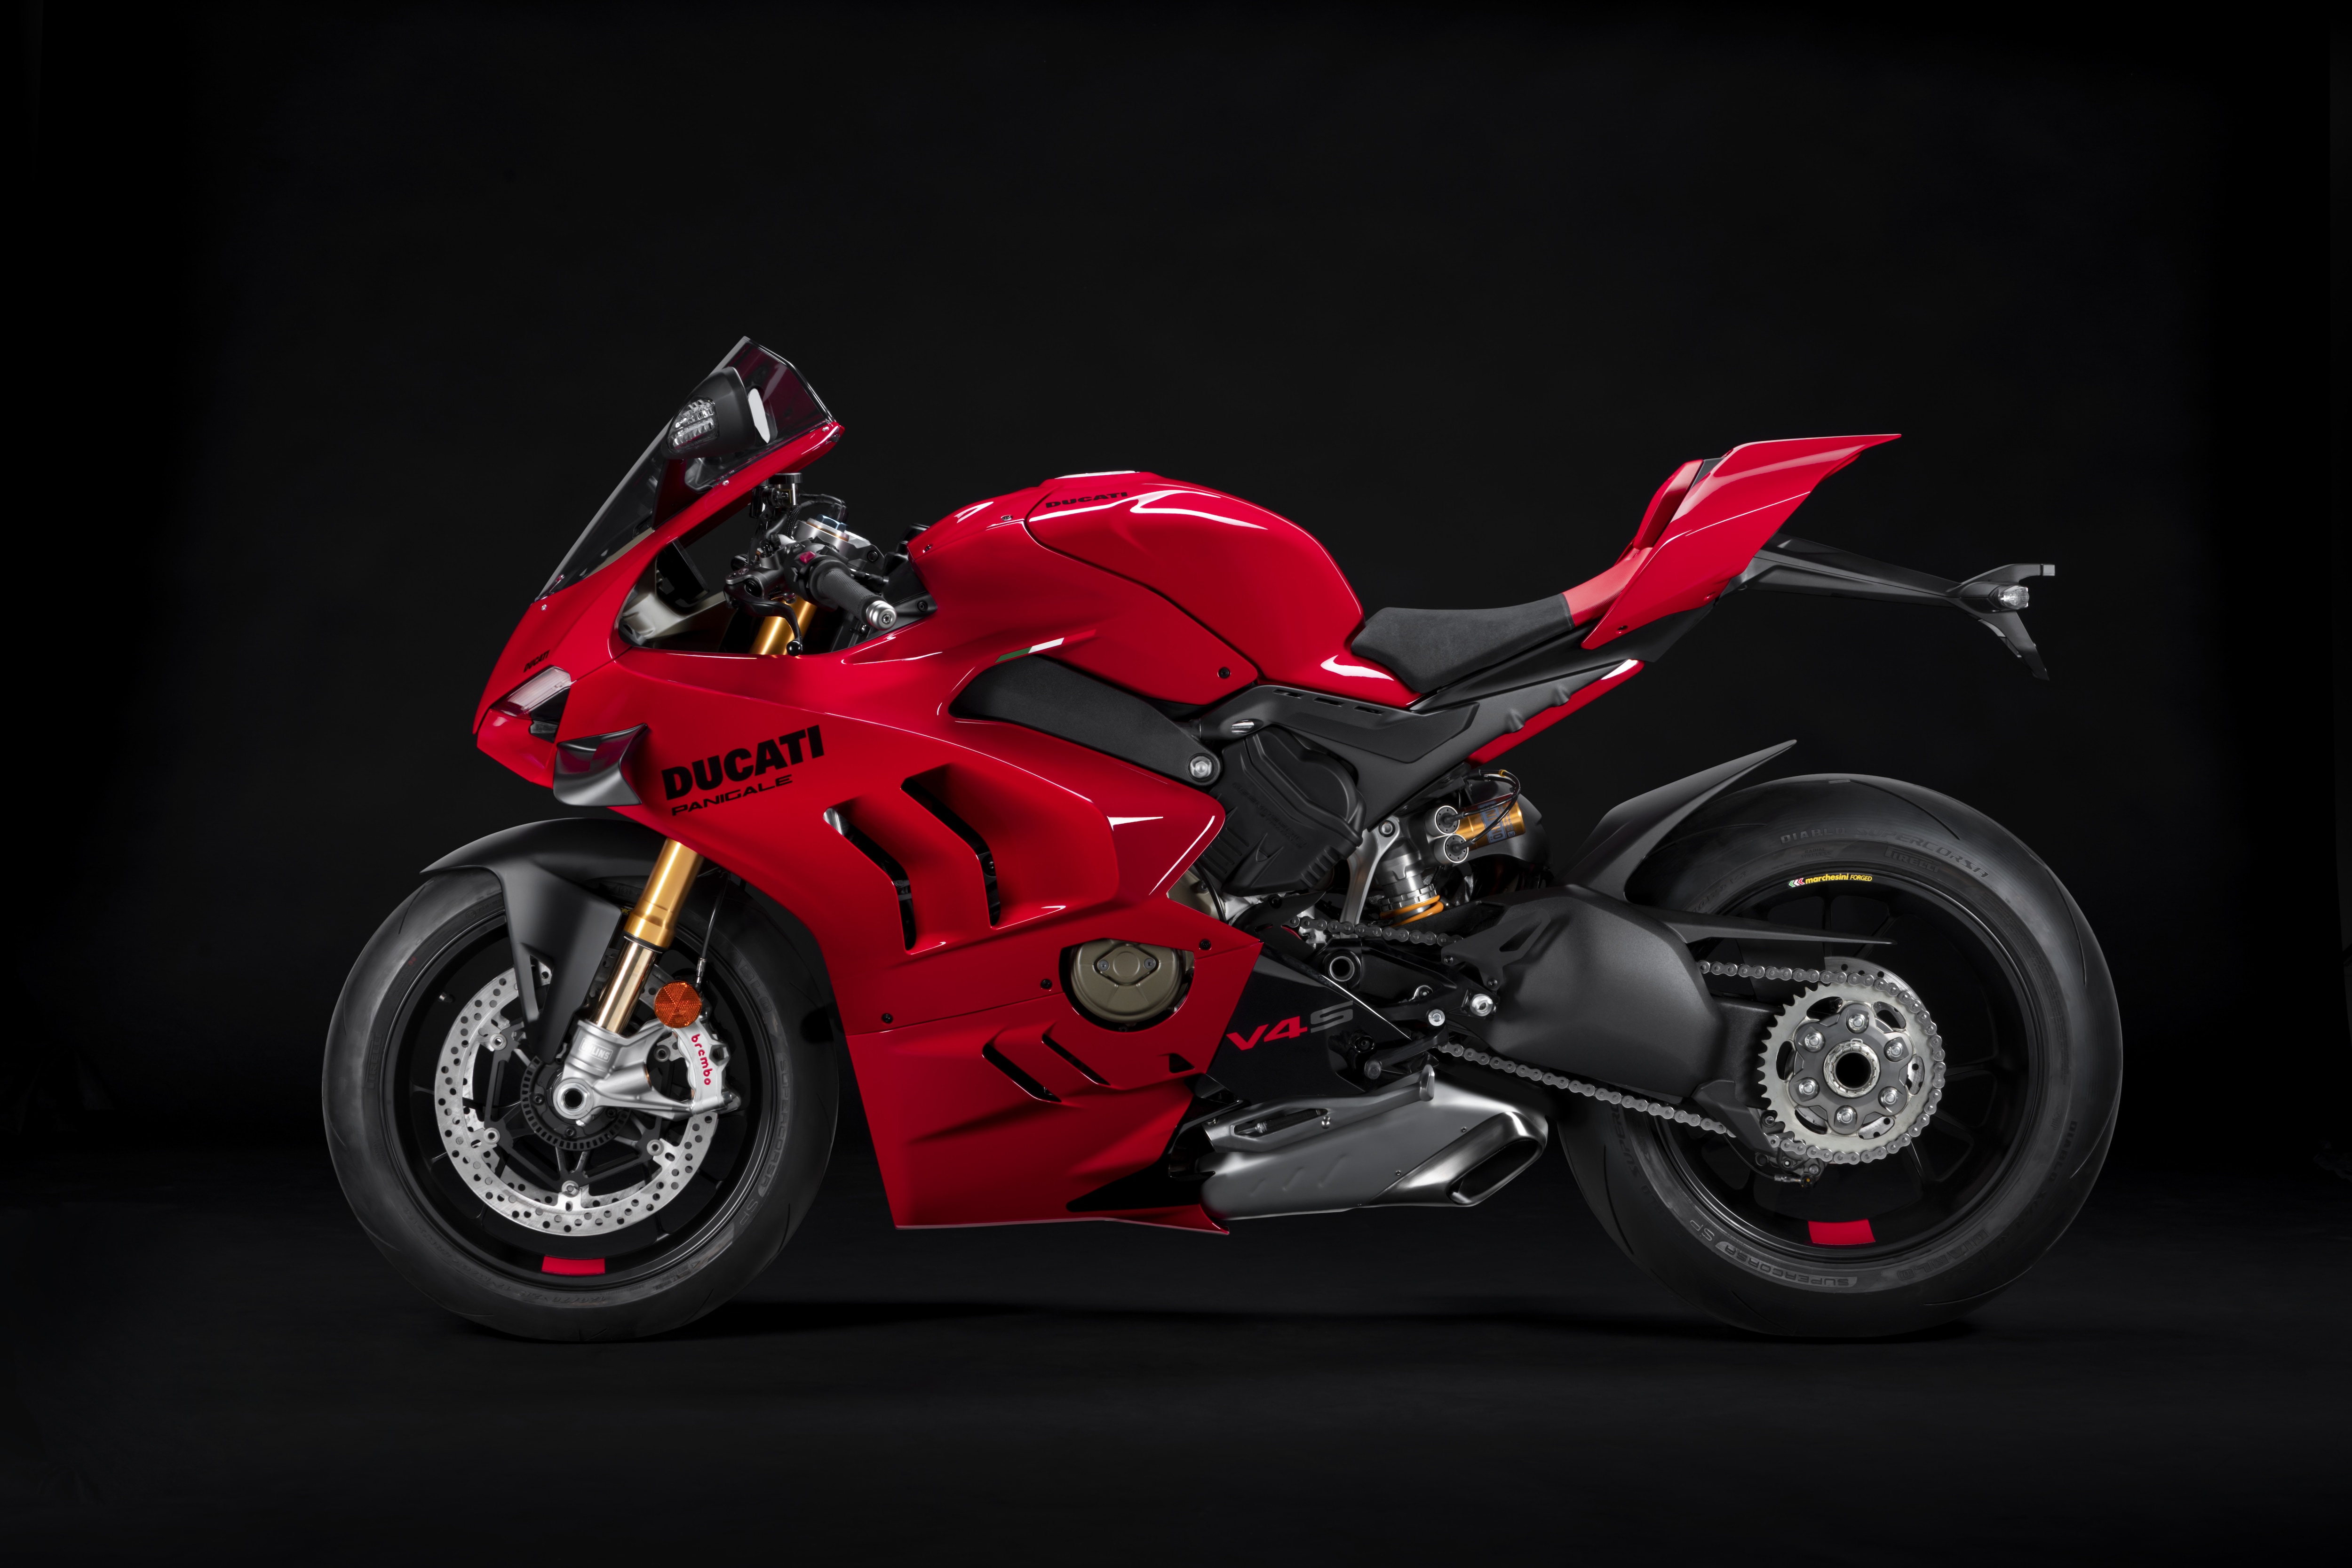 The 2022 Ducati Panigale V4 will be available in this red colour starting December.